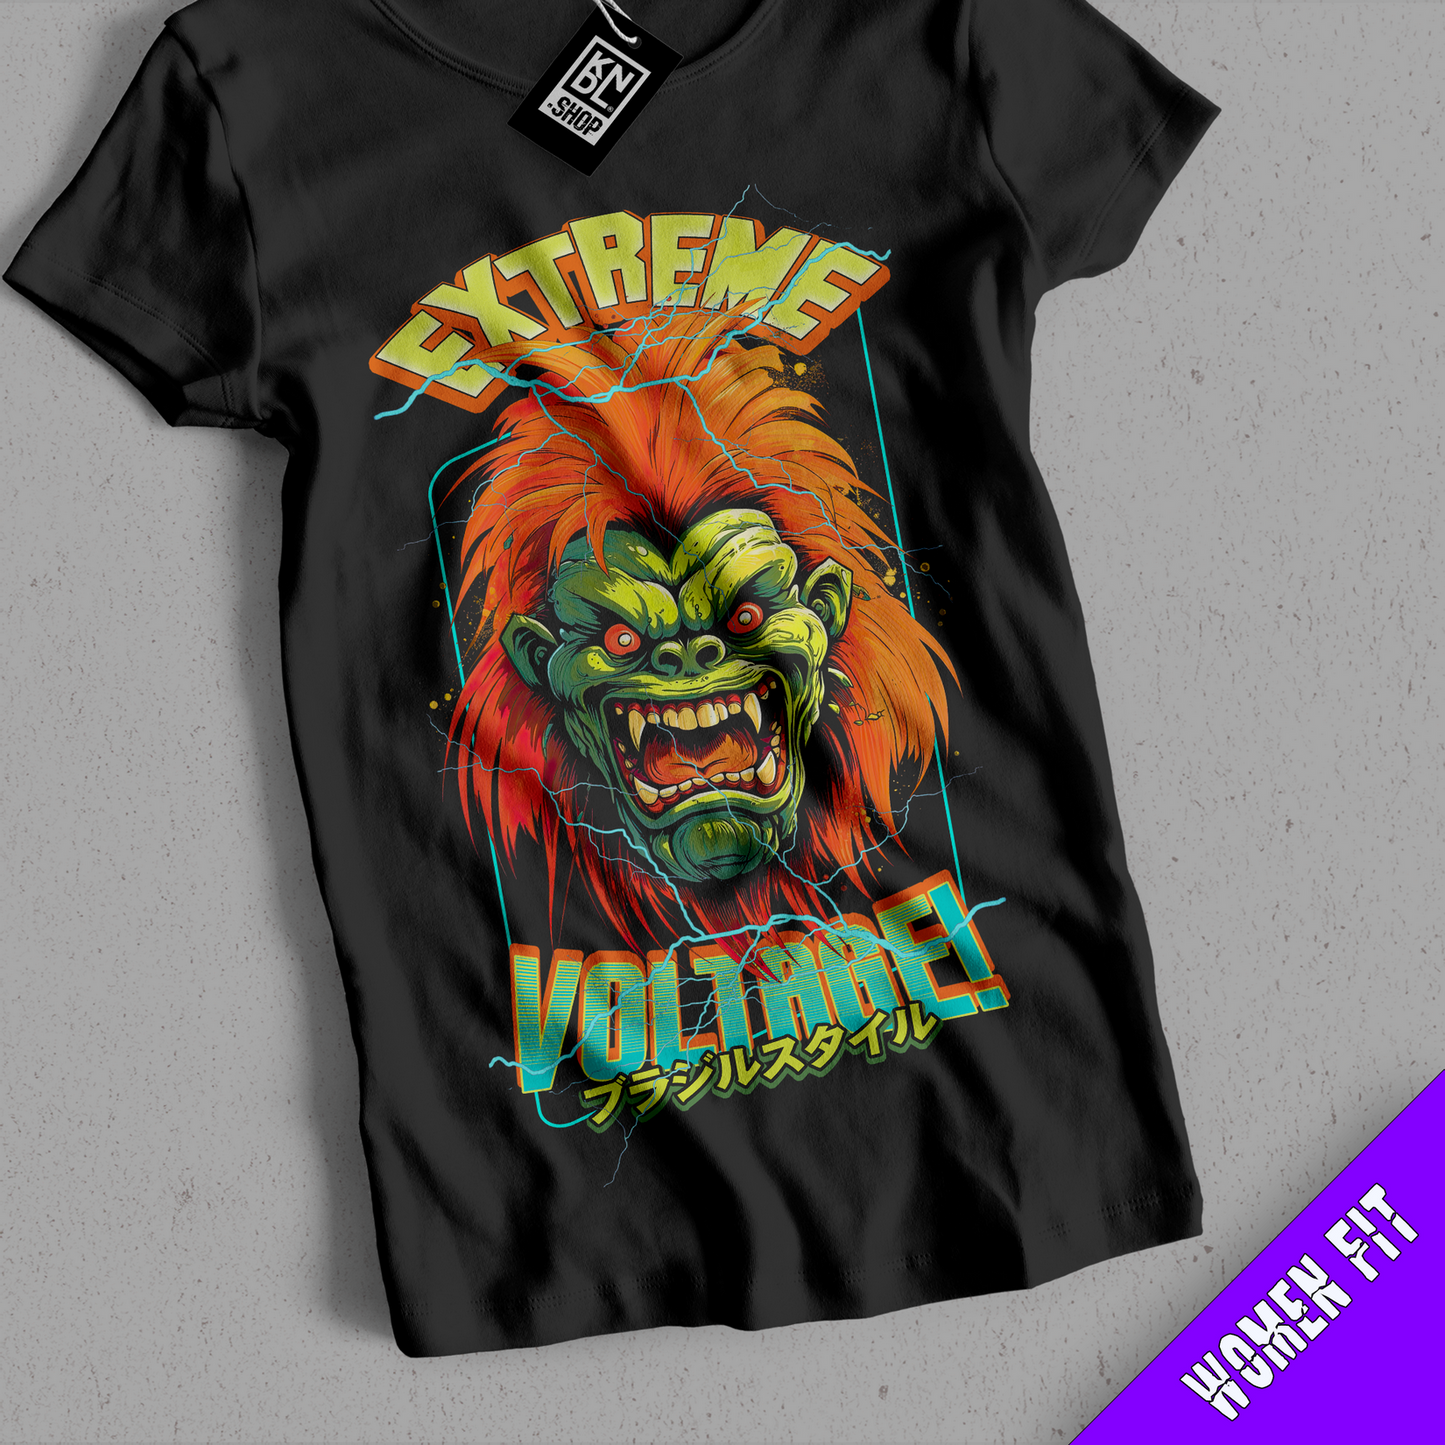 TEE NR 514 | BLANKA EXTREME VOLTAGE | STREET FIGHTER INSPIRED SHORT SLEEVE T-SHIRT FOR M/F